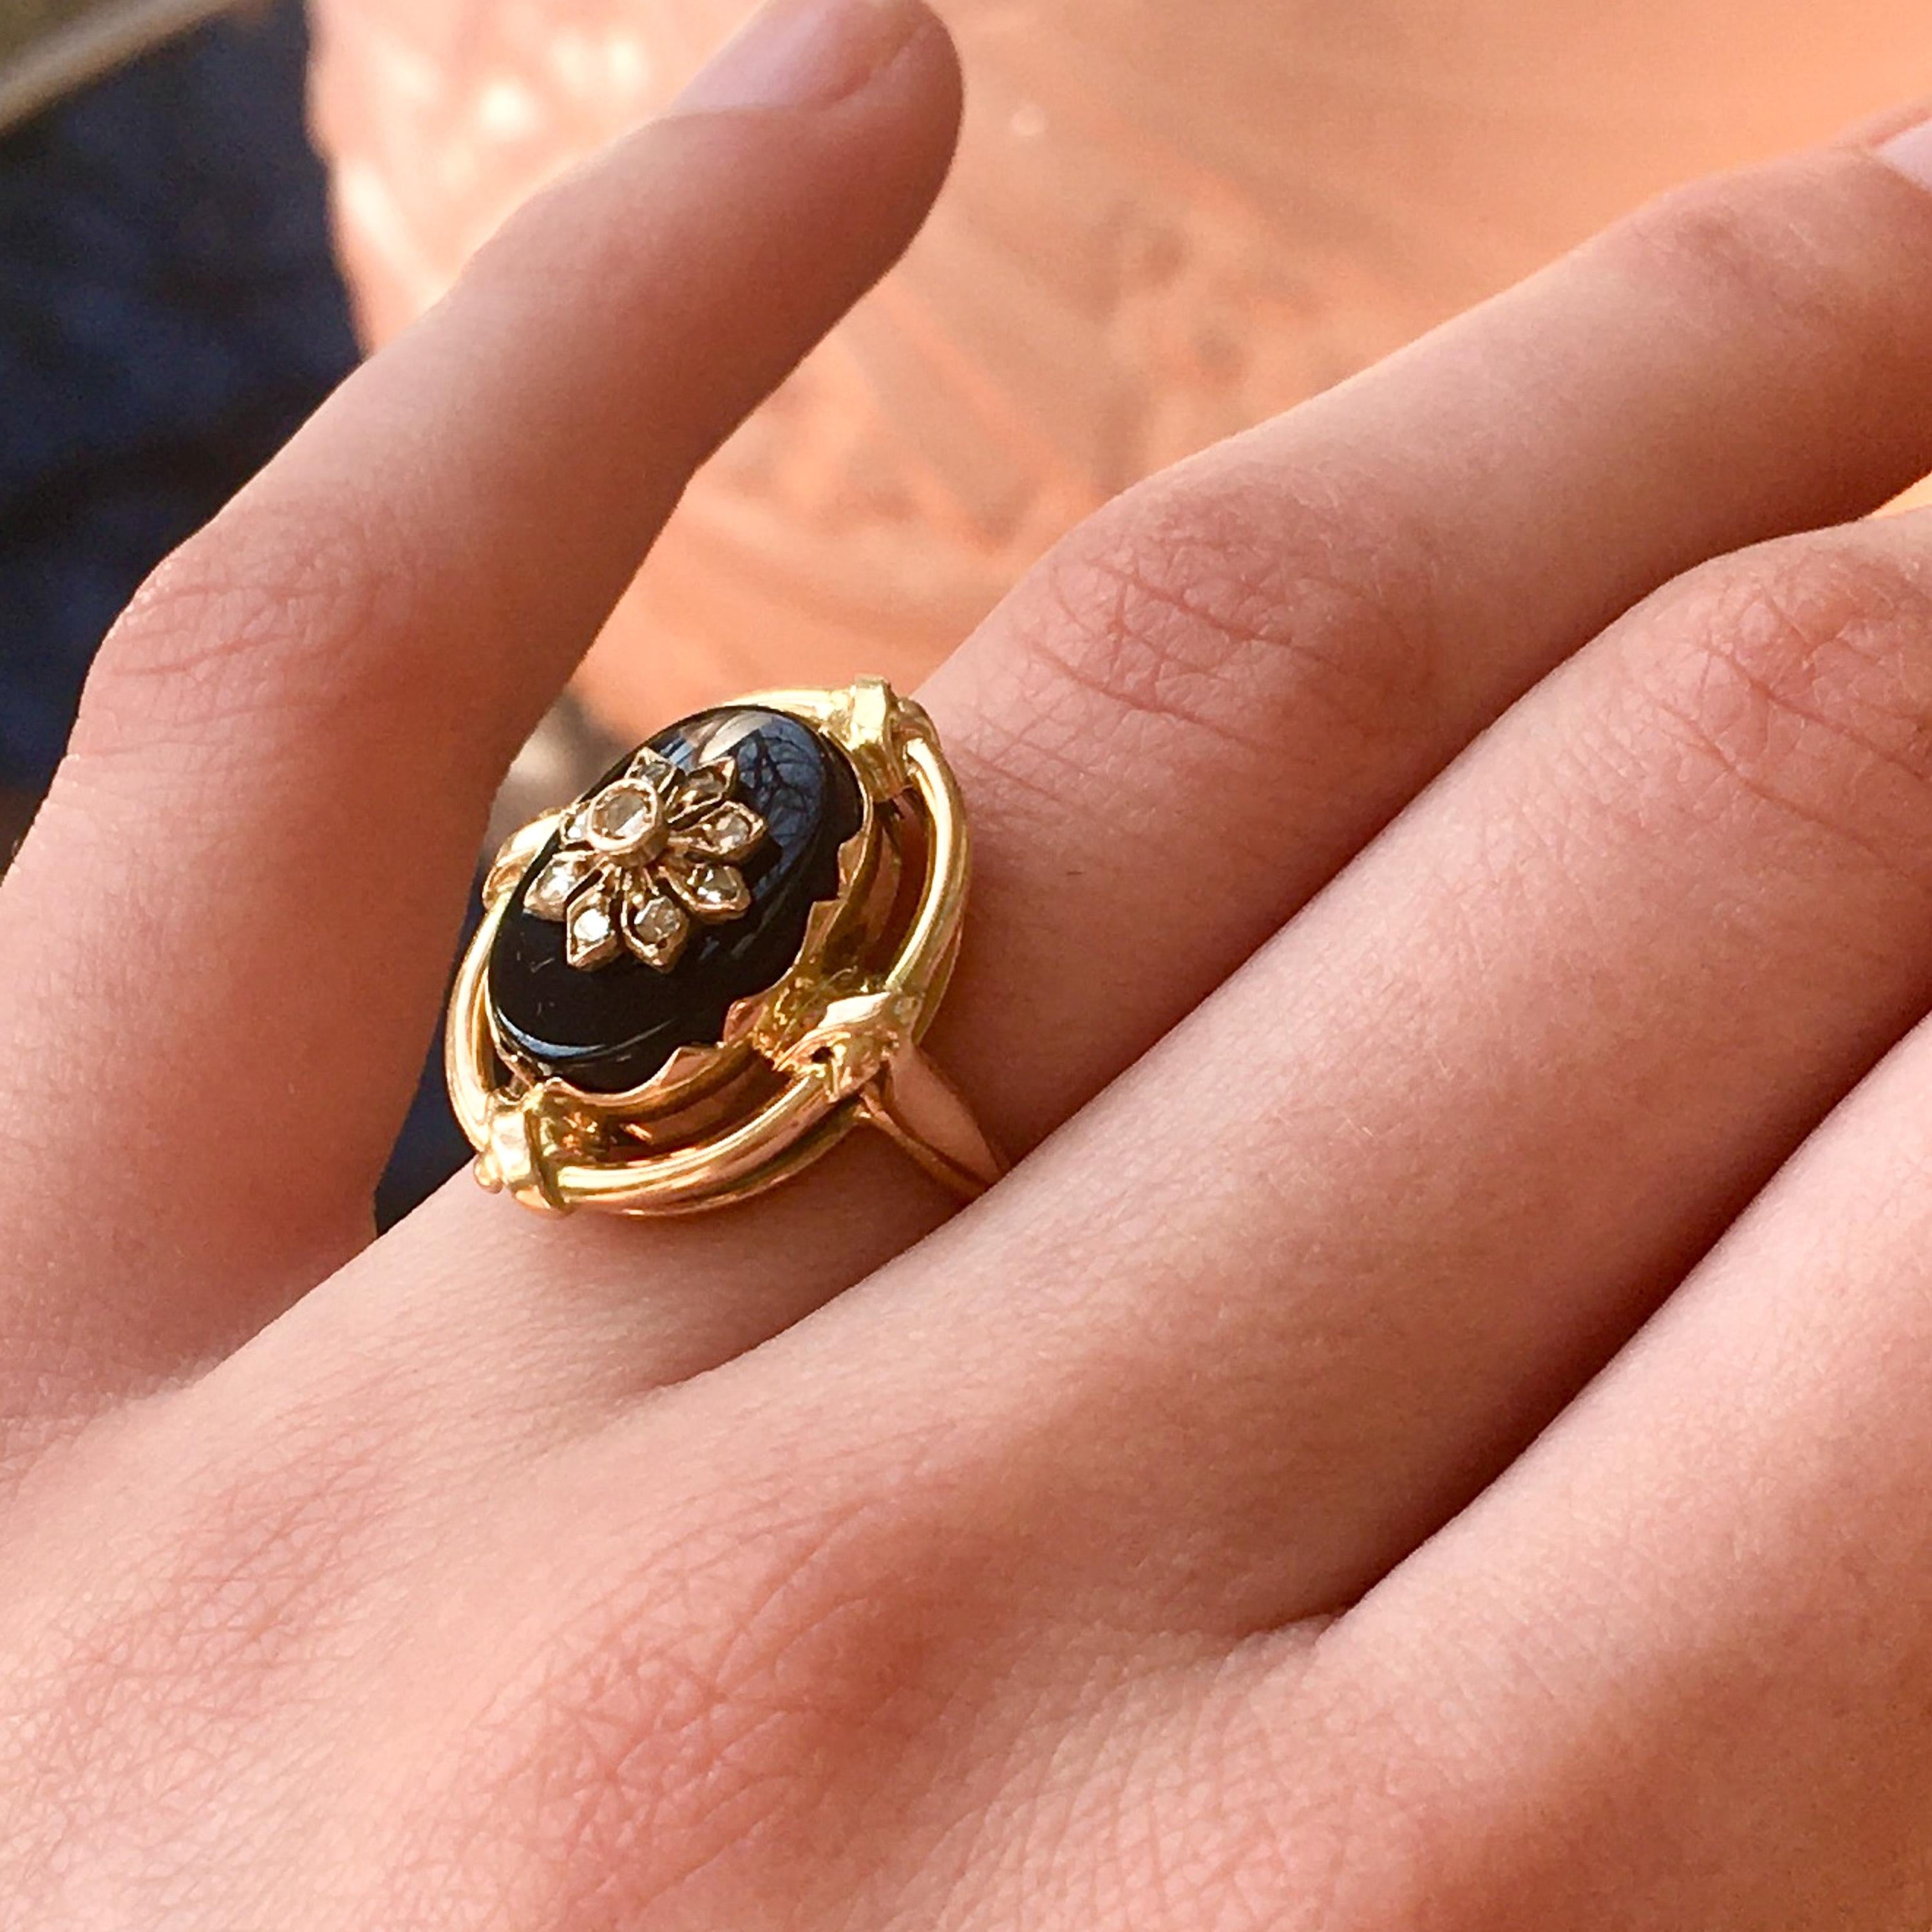 A vintage 14 karat yellow gold black onyx and rose cut diamond ring. The band of the ring is created in 14 karat gold with gold crossed figures on four sides of the frame border. The oval-shaped deep black onyx is beautifully set with a yellow gold